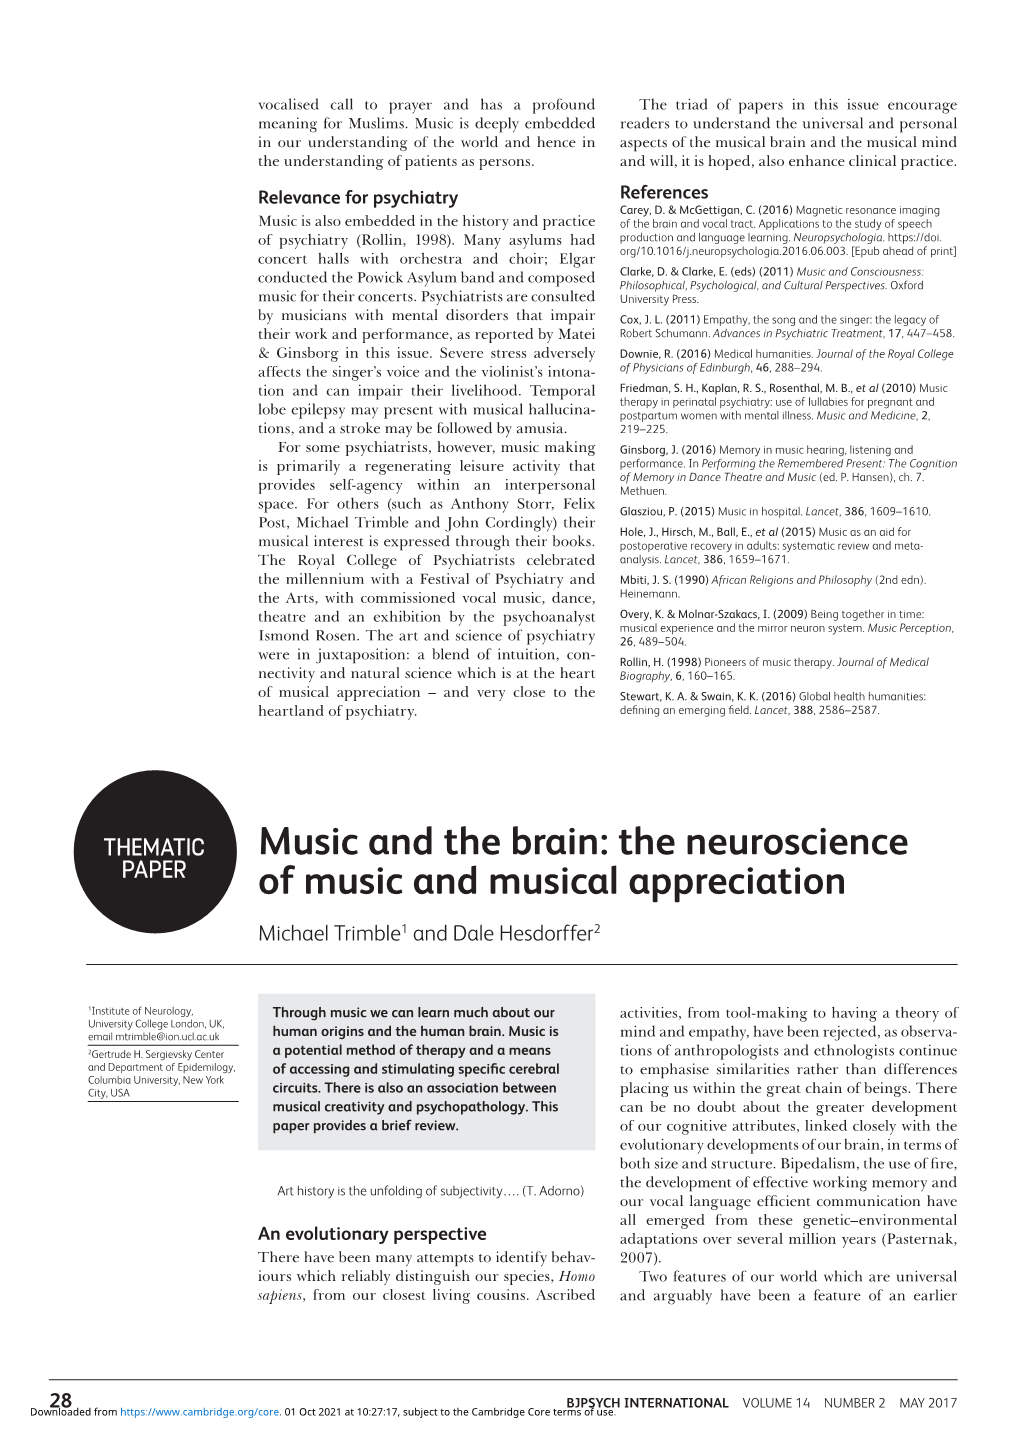 Music and the Brain: the Neuroscience PAPER of Music and Musical Appreciation Michael Trimble1 and Dale Hesdorffer2